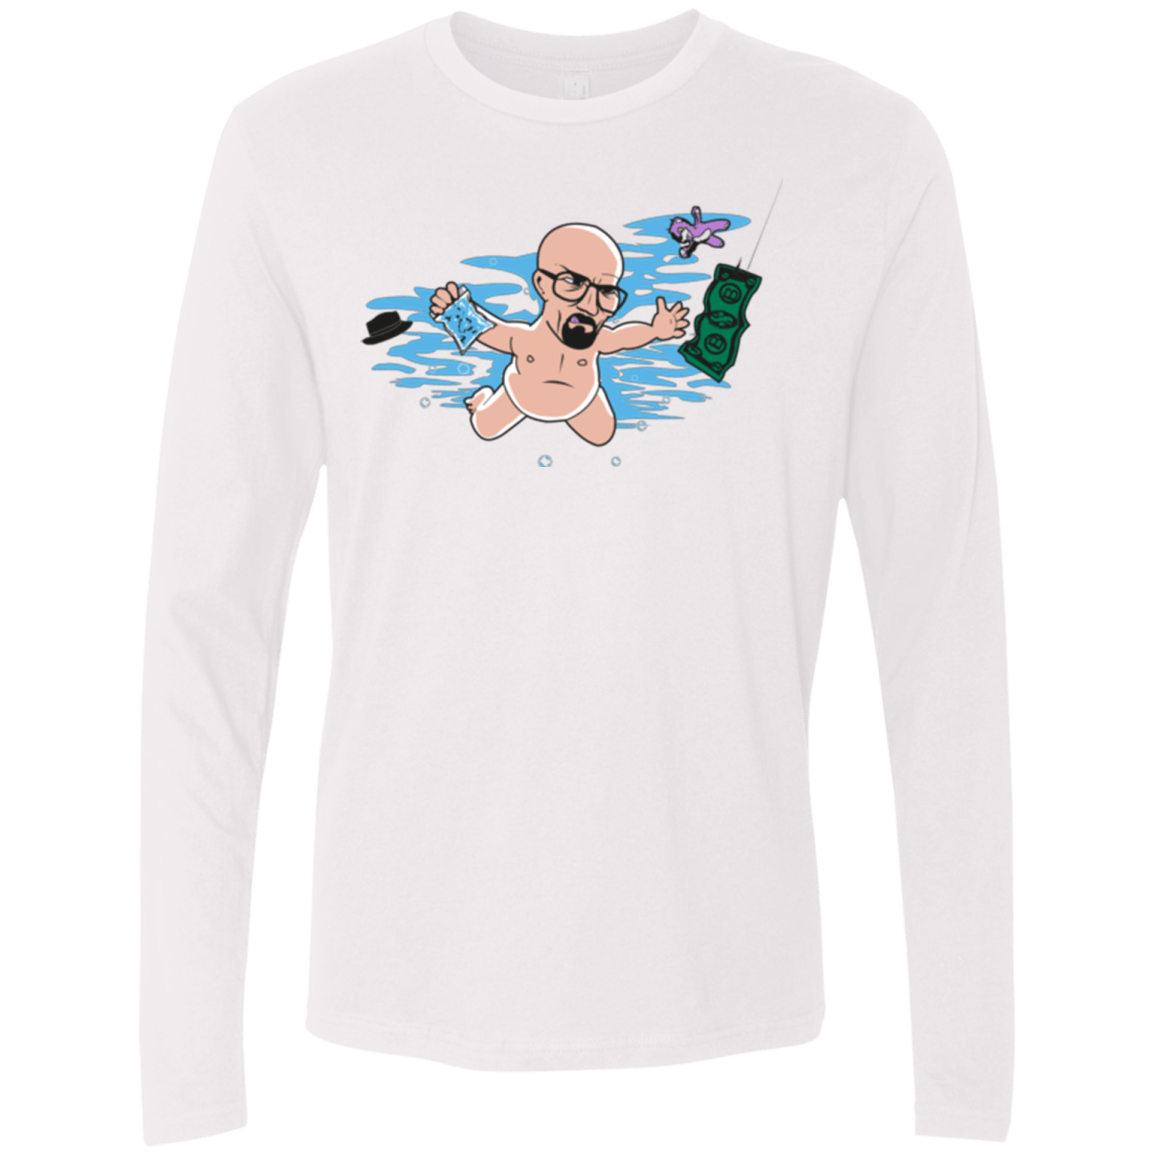 T-Shirts White / Small NeverBad Men's Premium Long Sleeve